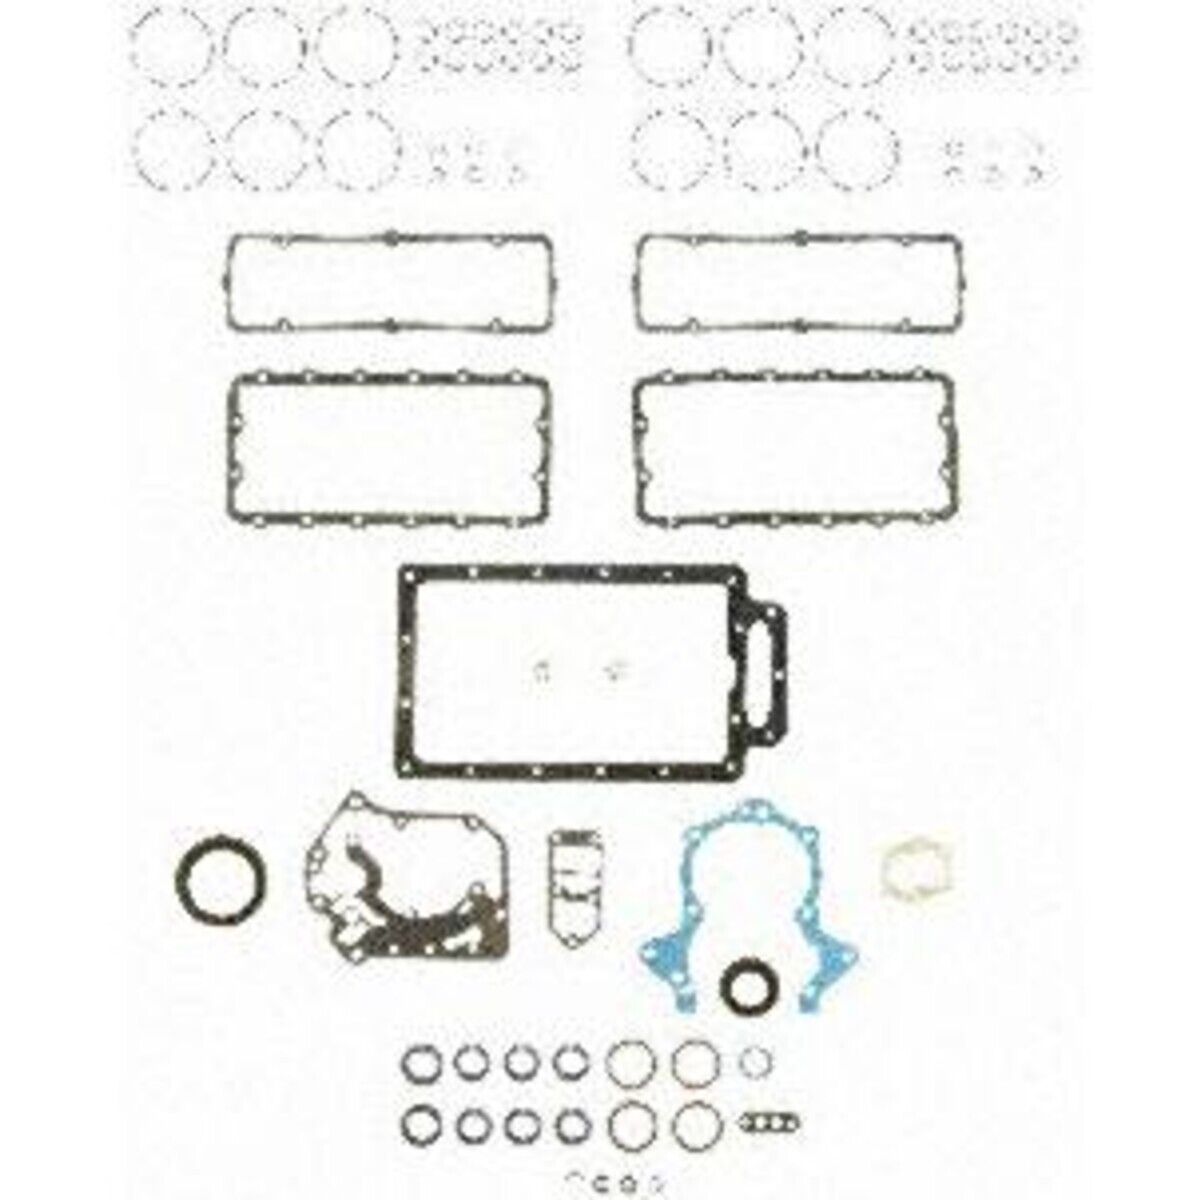 FS 8177 S Felpro Set Engine Gasket Sets for Chevy Chevrolet Corvair 1965-1969